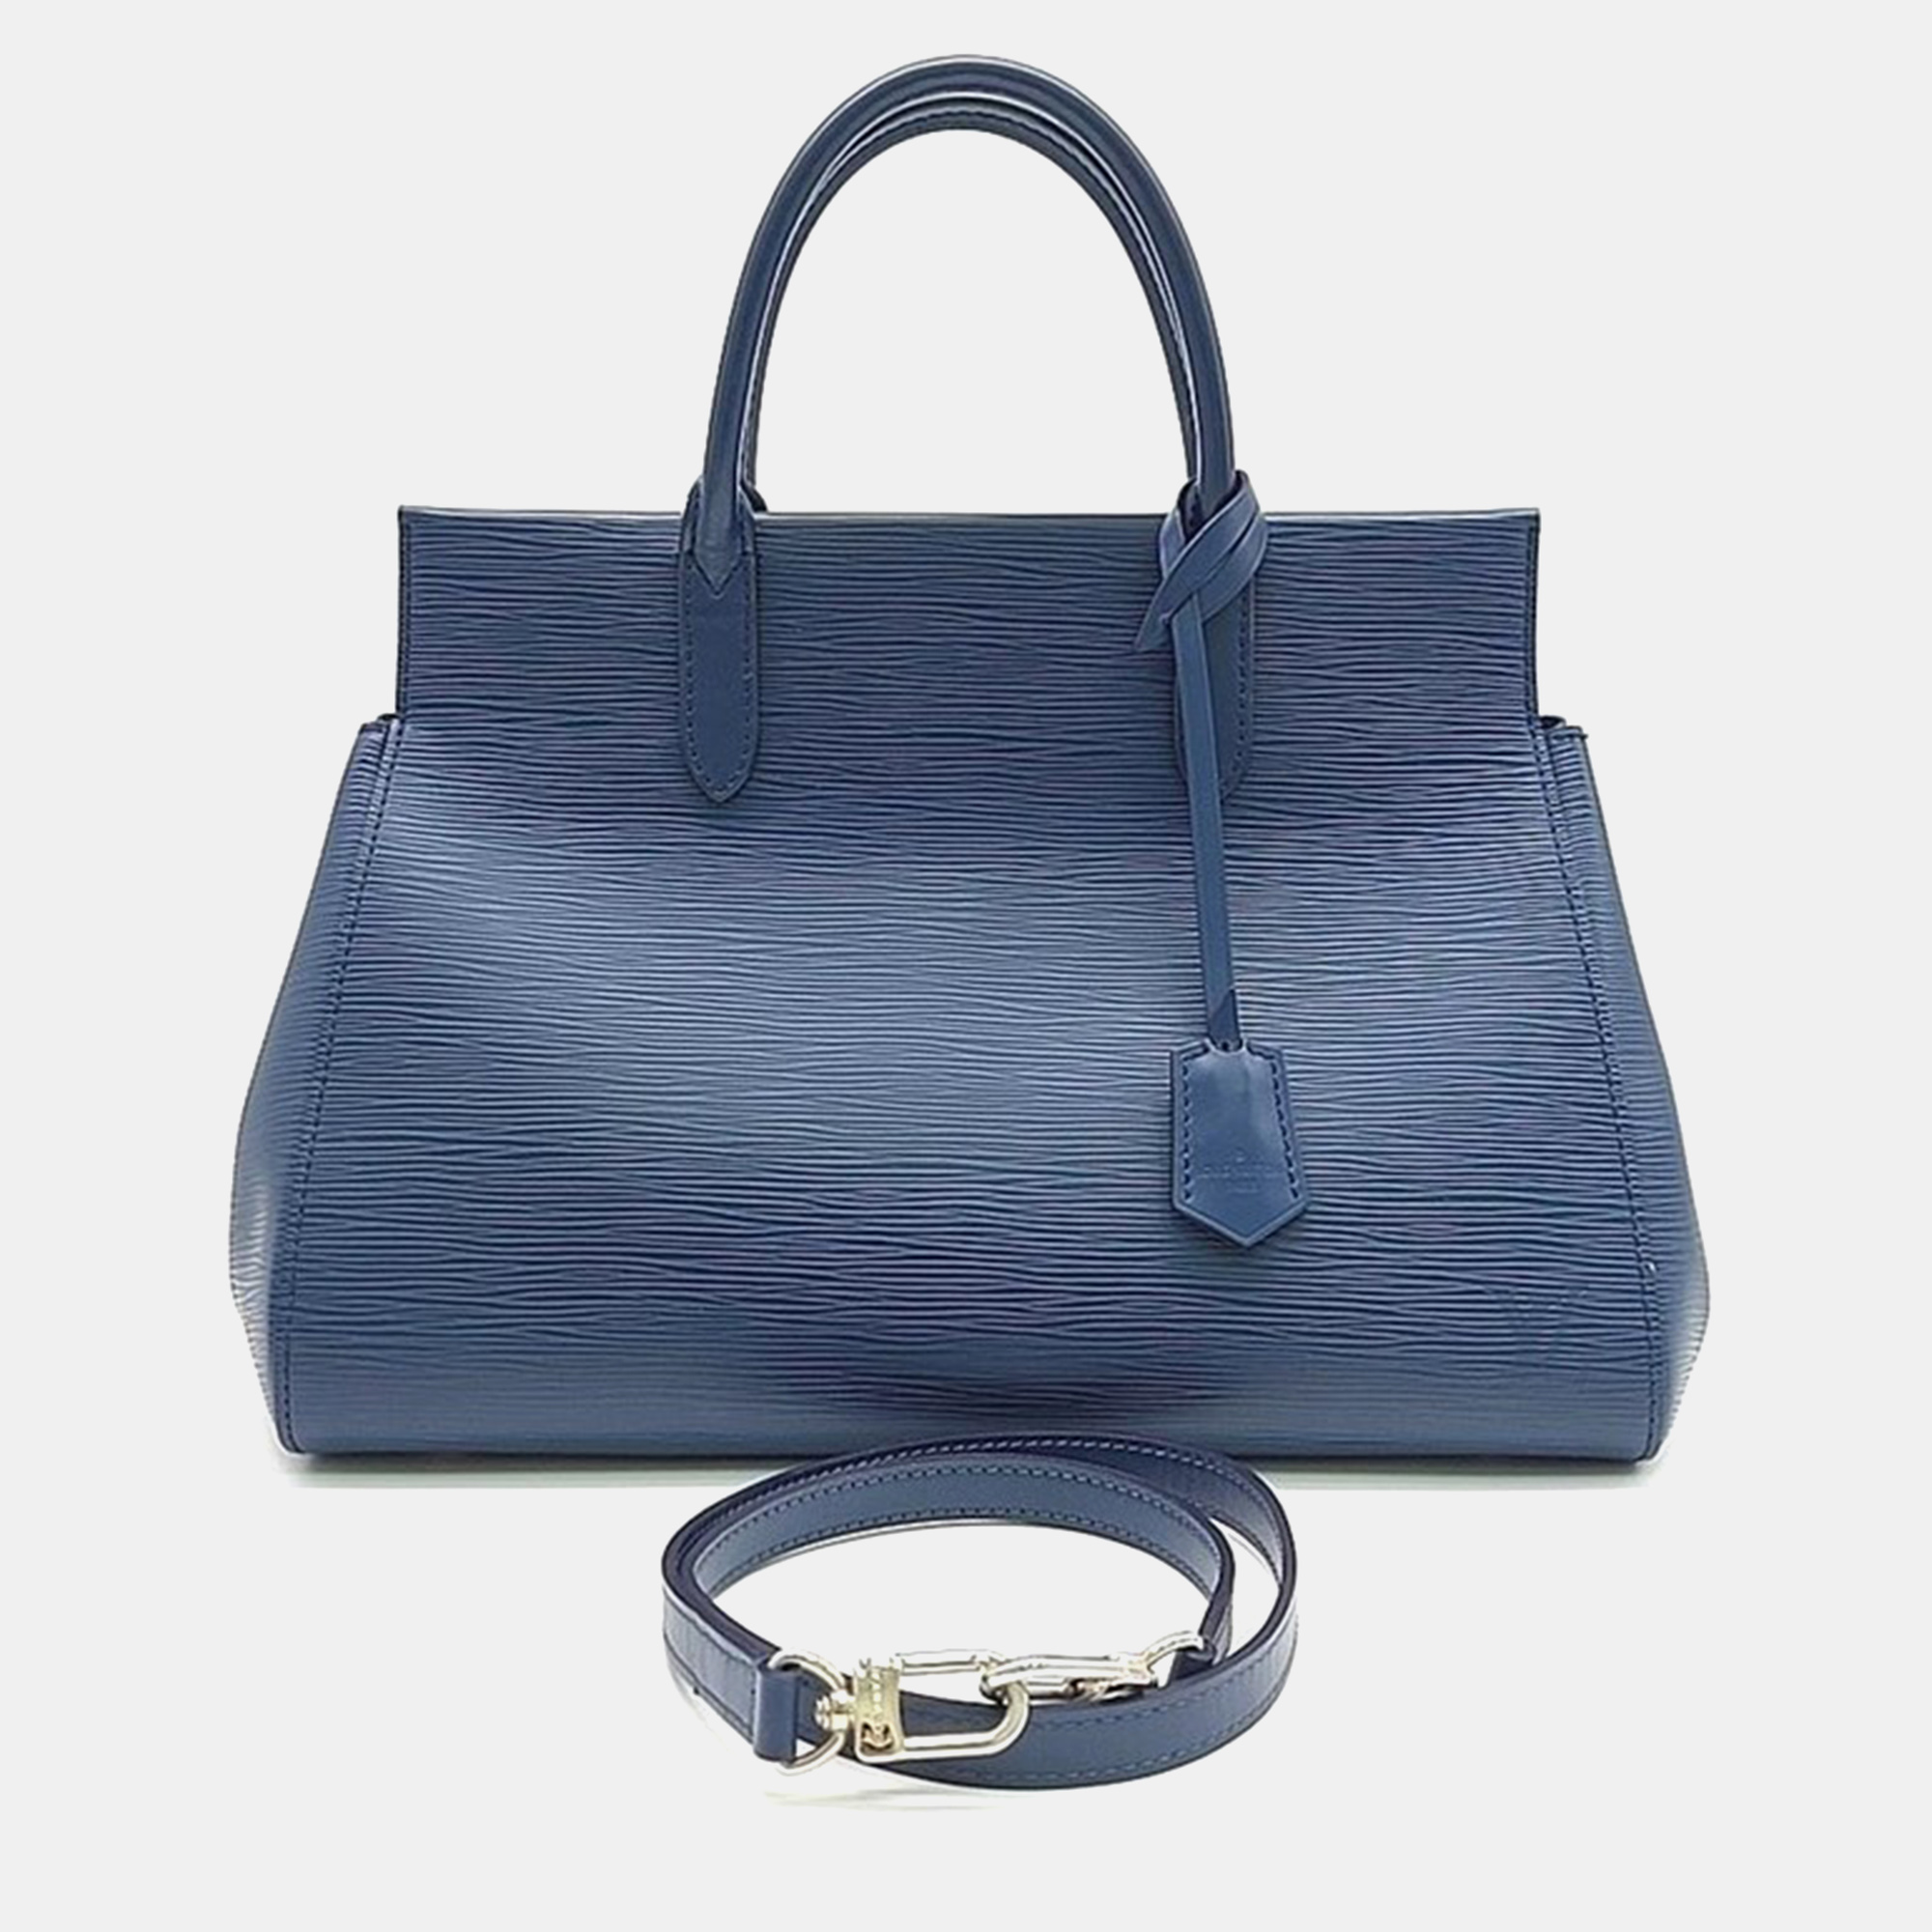 Louis vuitton navy epi leather marly mm tote bag